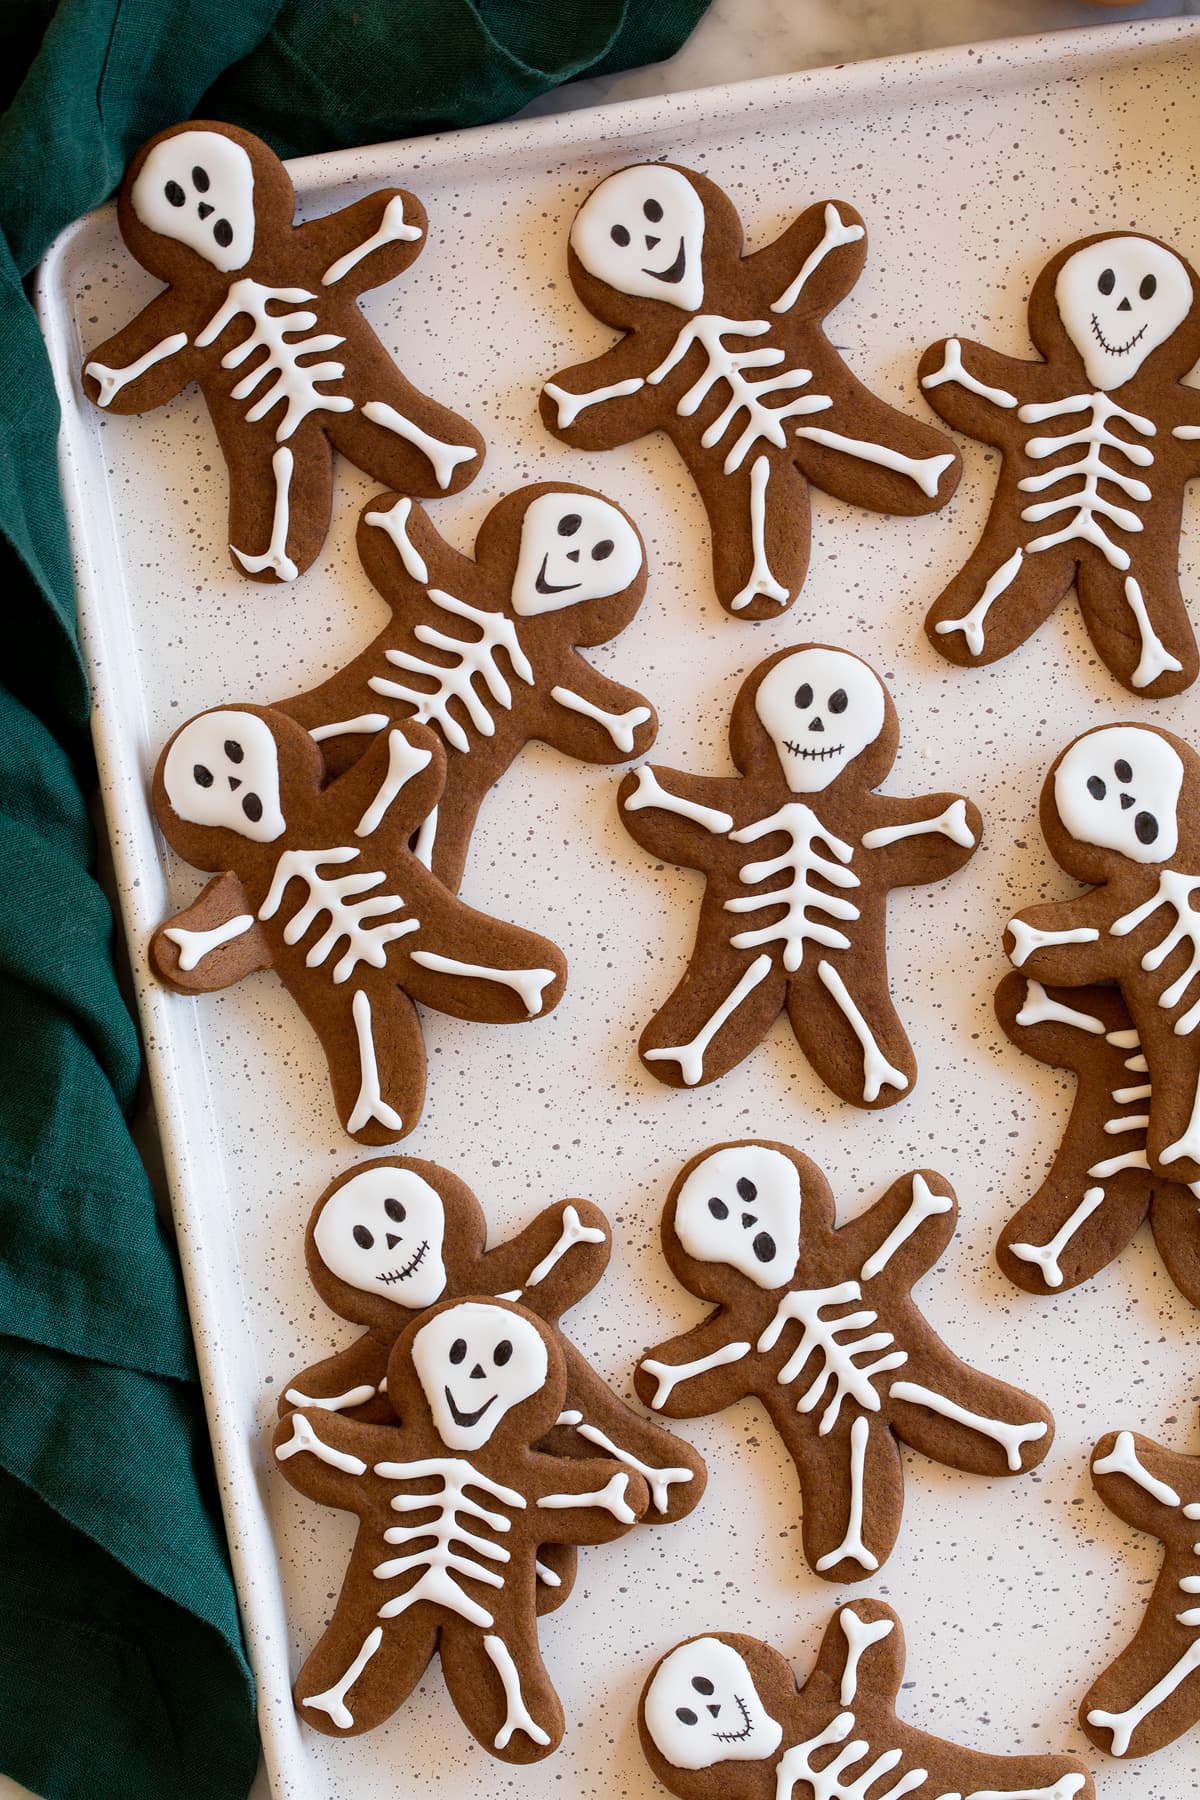 Gingerbread cookies with skeleton bodies piped over with white icing.